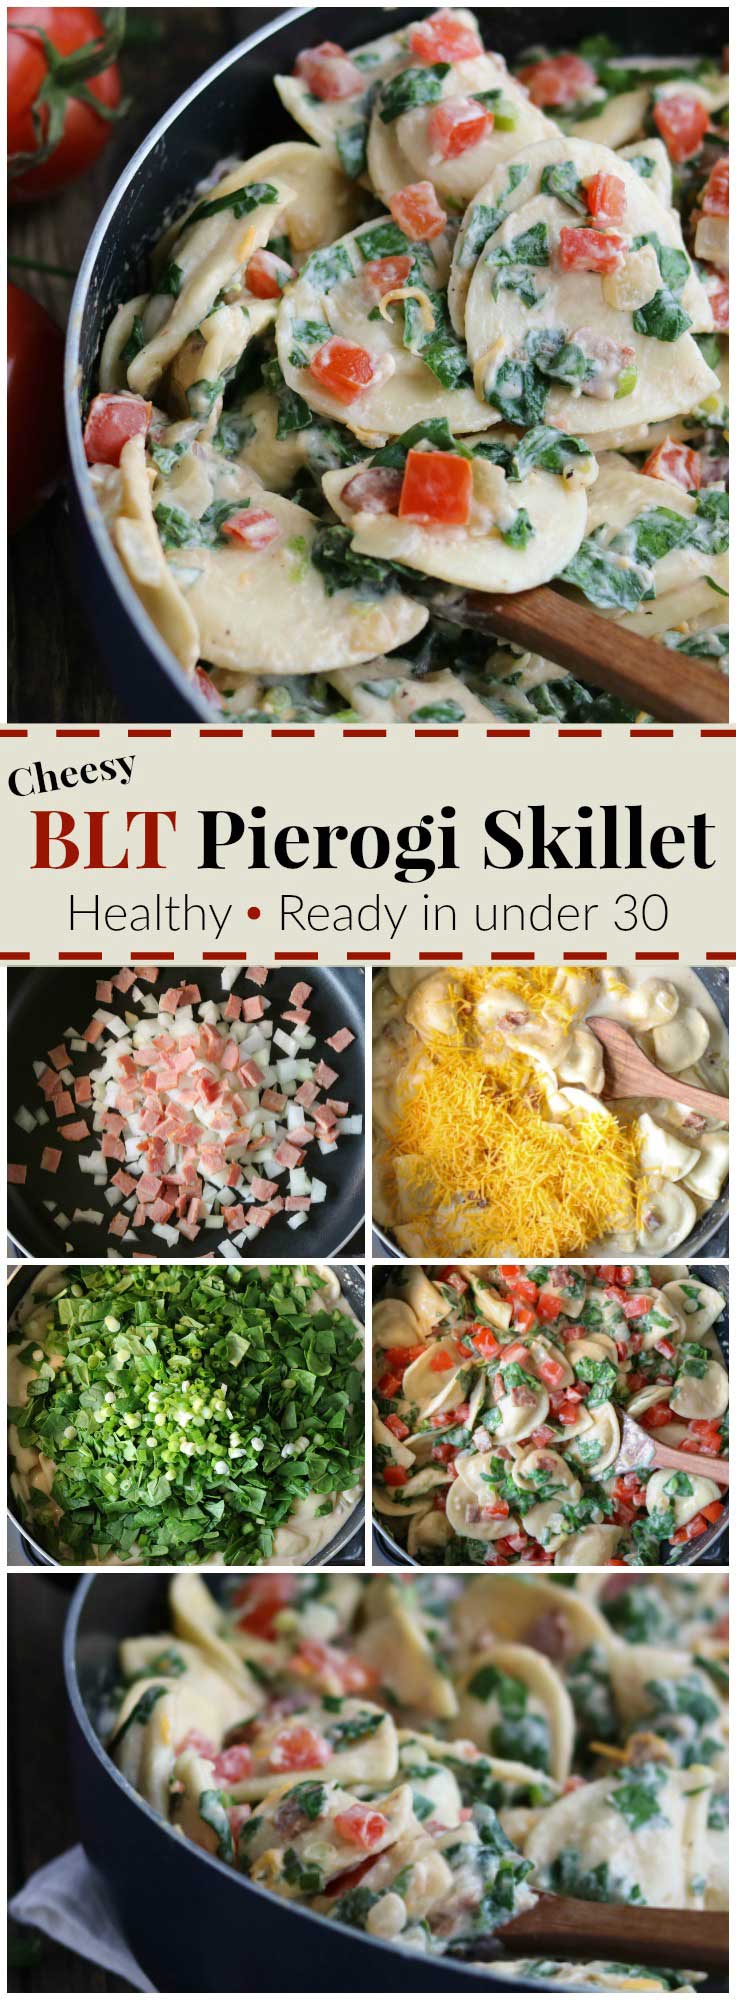 BLT flavor + a 2-cheese “alfredo” sauce make this healthy, quick and easy skillet meal a family favorite! It’s a 30 minute meal that can even be made ahead and quickly re-warmed later! Our Cheesy BLT Pierogi Skillet Dinner recipe is true comfort food with a satisfyingly fresh twist! Pillowy soft pierogies are draped in a creamy, rich and cheesy sauce and loaded up with vibrant BLT flavors! A deliciously healthy pierogi recipe your family will ask for again and again! | www.TwoHealthyKitchens.com